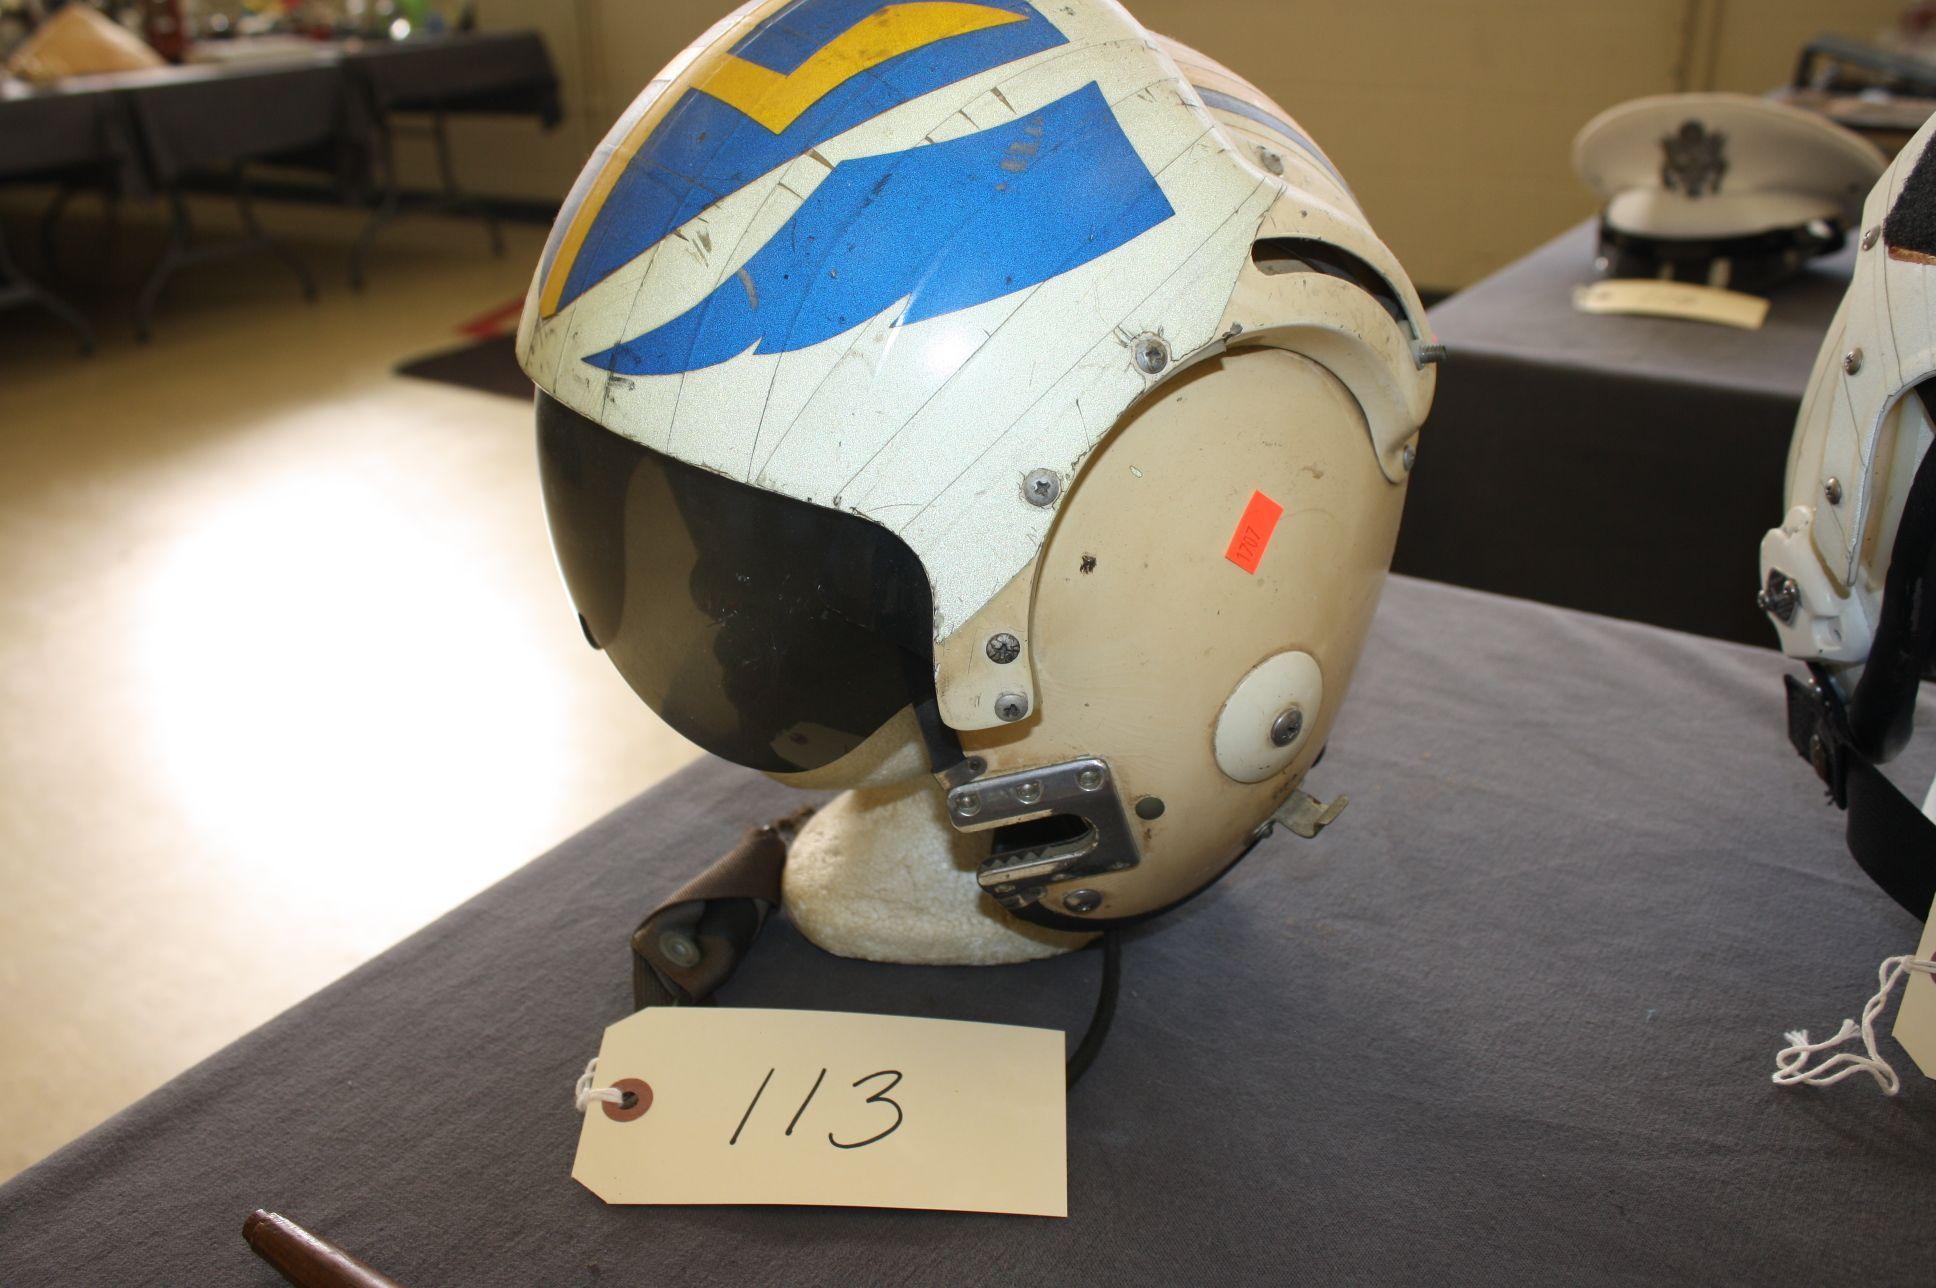 HELICOPTER PILOT HELMET FROM THE "CARL VINCENT", CIRCA 1970S